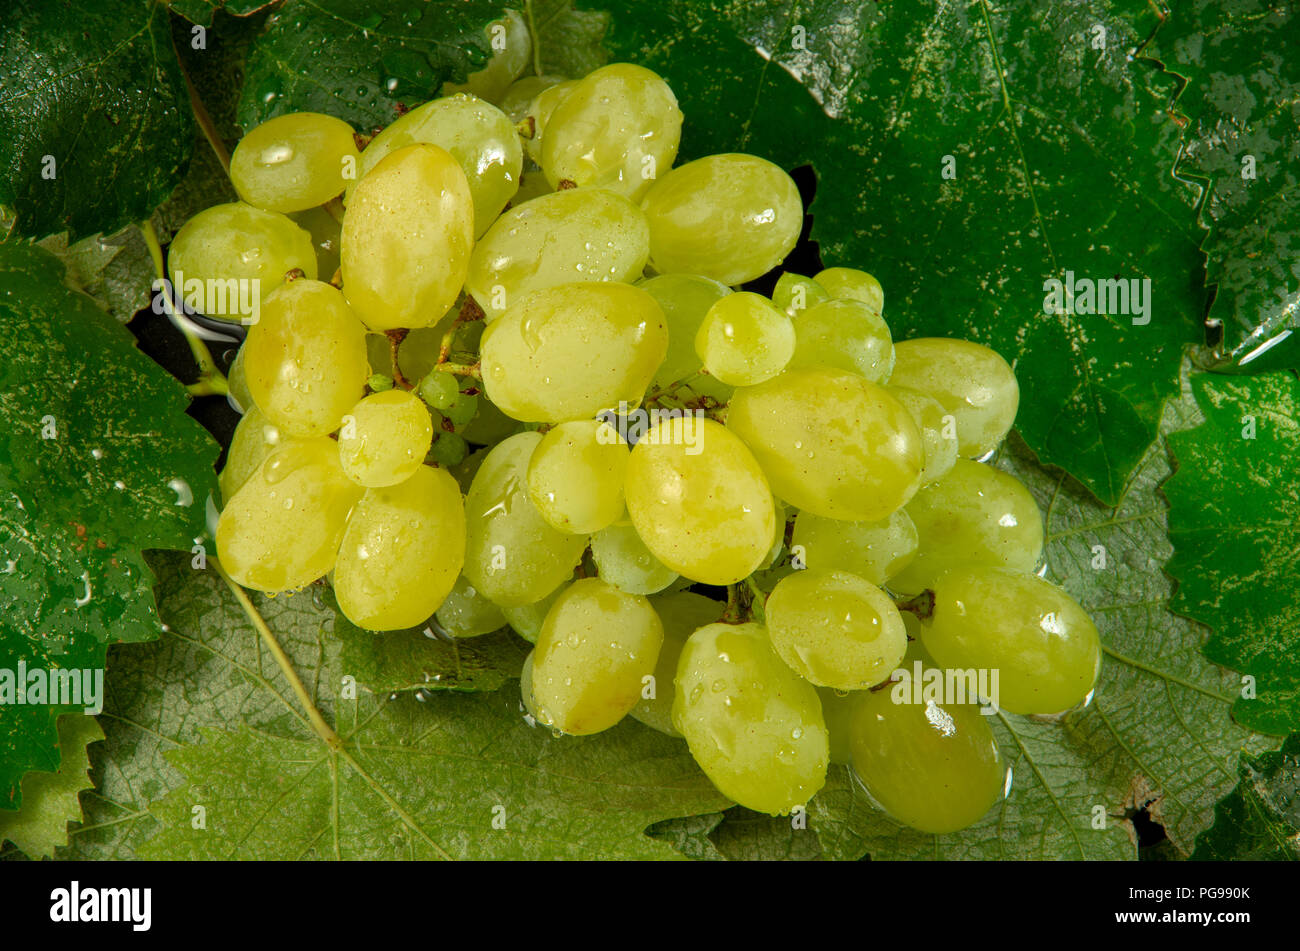 Wet grapes with water drops on a background of close-up leaves Stock Photo